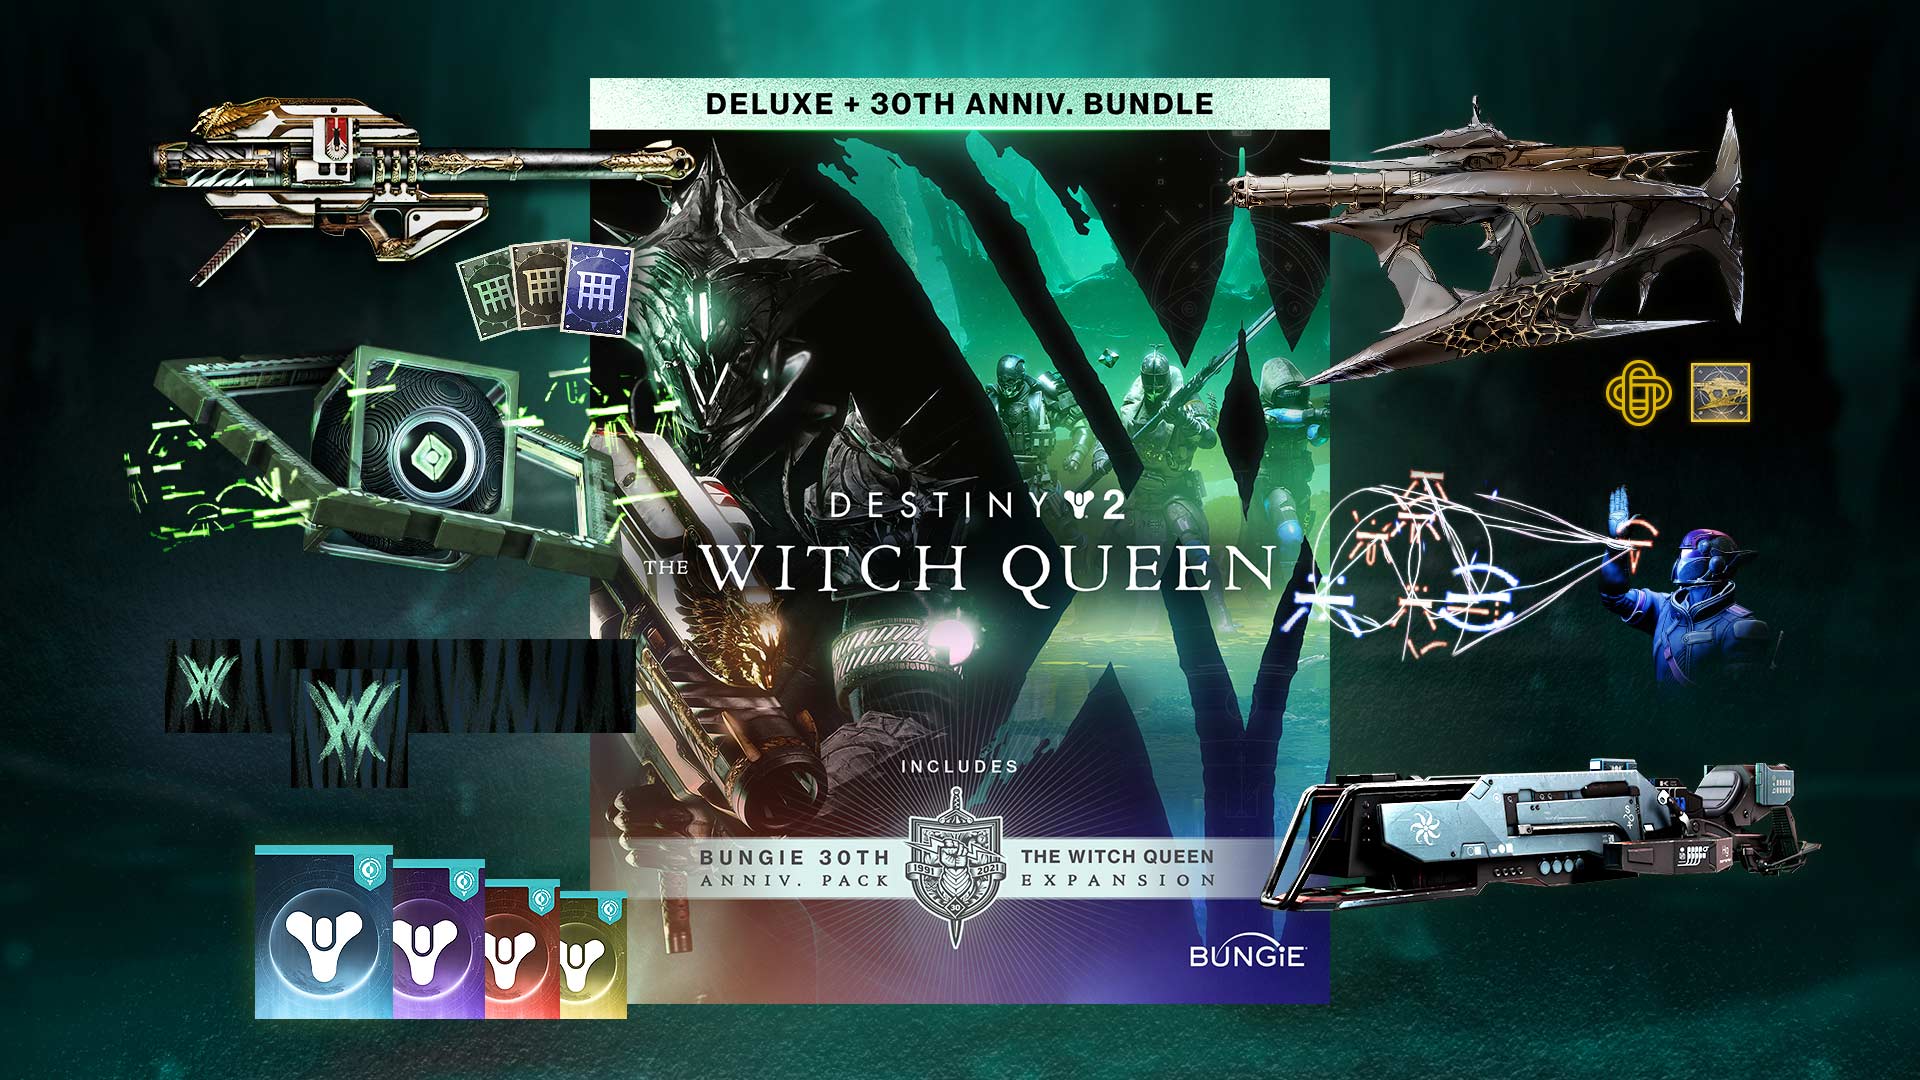 Destiny 2 The Witch Queen Different Editions, Bungie 30th Anniversary